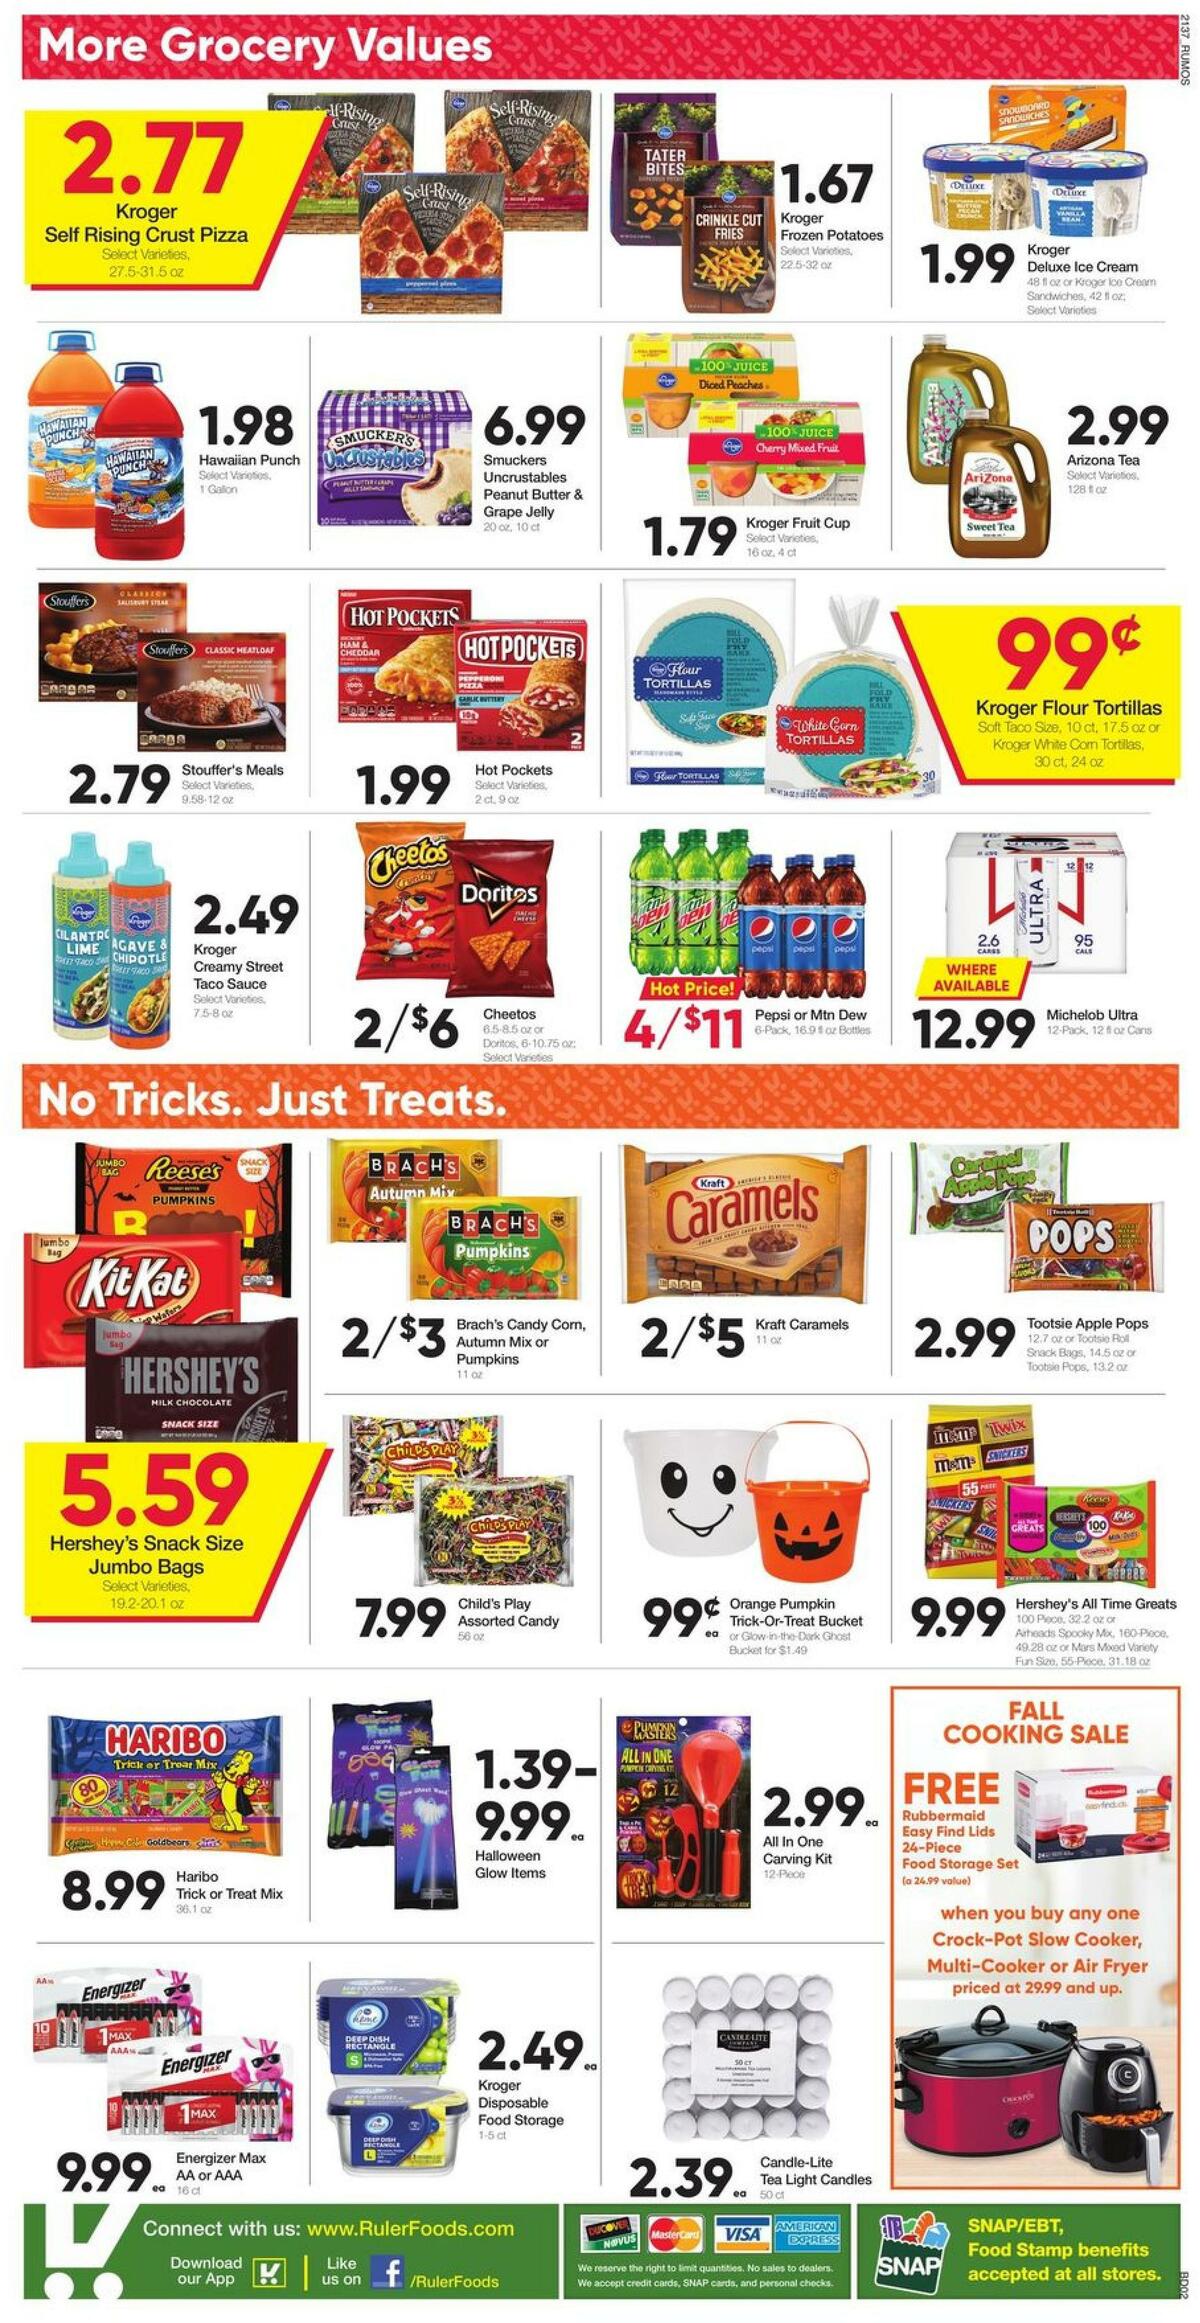 Ruler Foods Weekly Ad from October 13